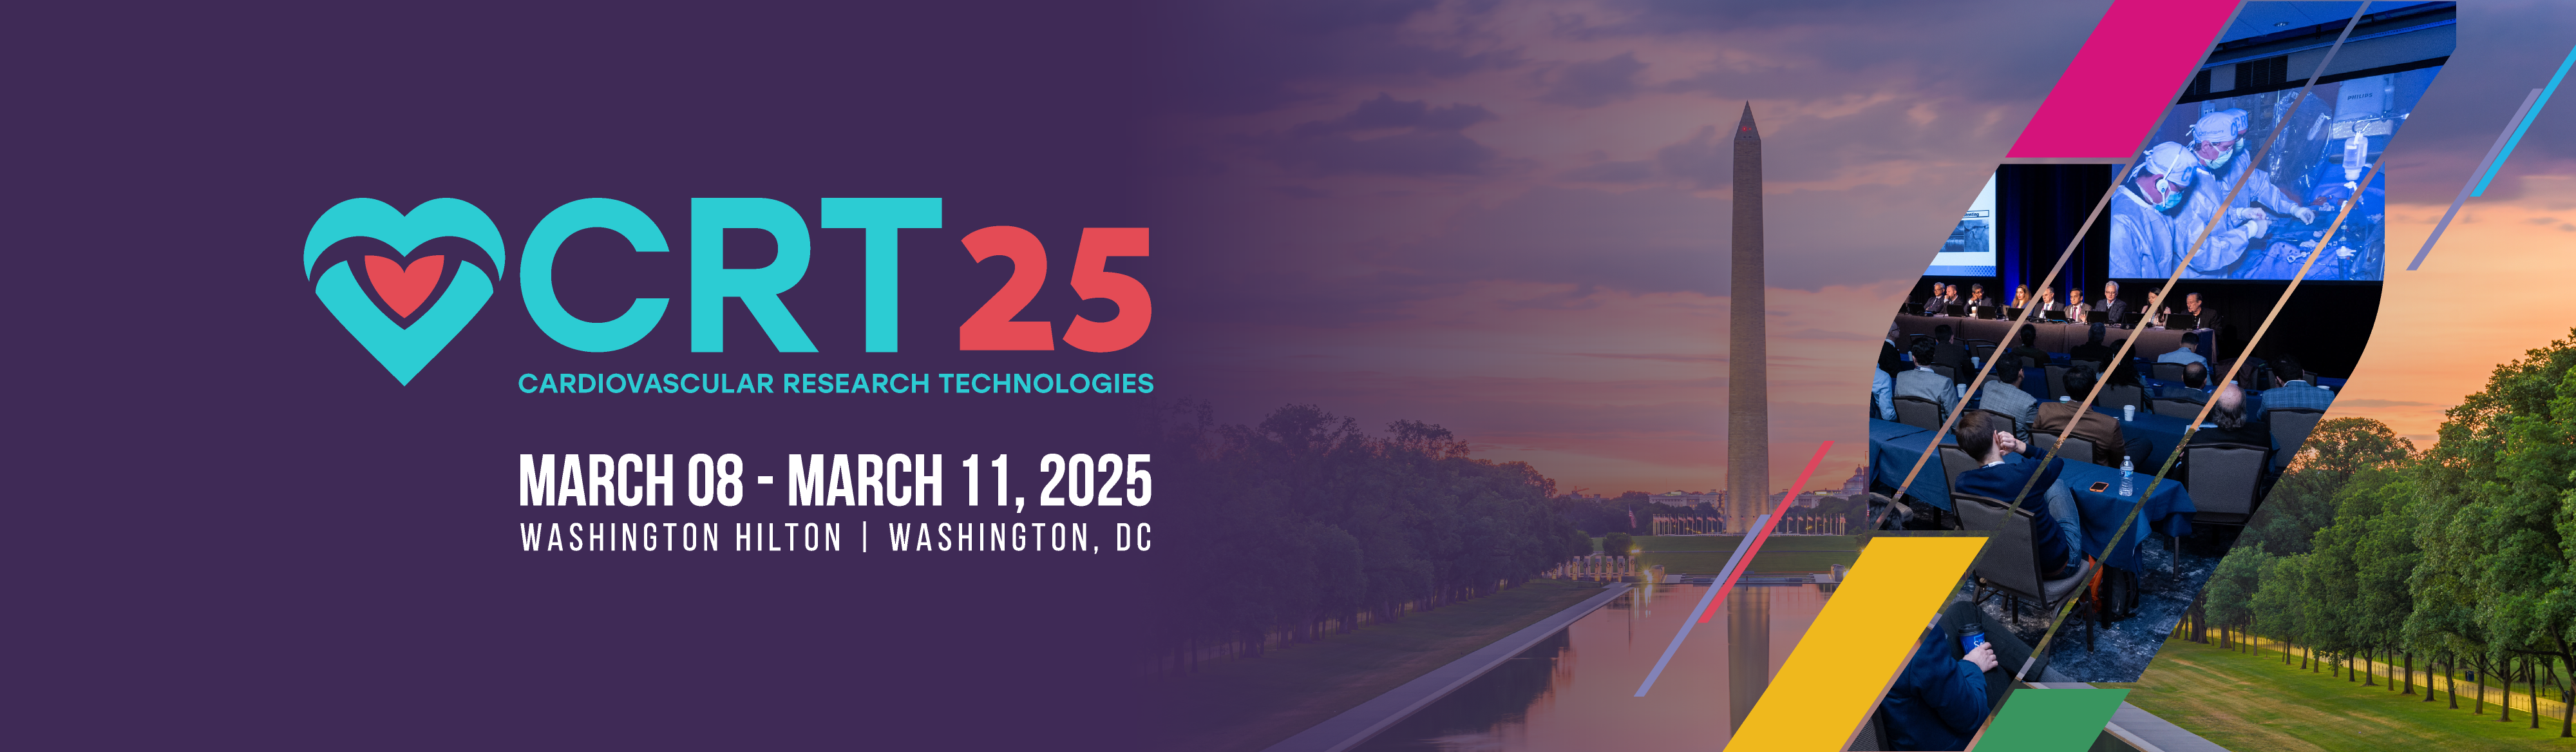 Save the Date: CRTmeeting 2025 in Washington DC, March 8 - March 11. Experience top-tier interventional cardiology presentations, education, innovation, and industry insights. Join leaders in cardiovascular research and technology advancement. #CRTmeeting #InterventionalCardiology #CardiologyConference #WashingtonDC